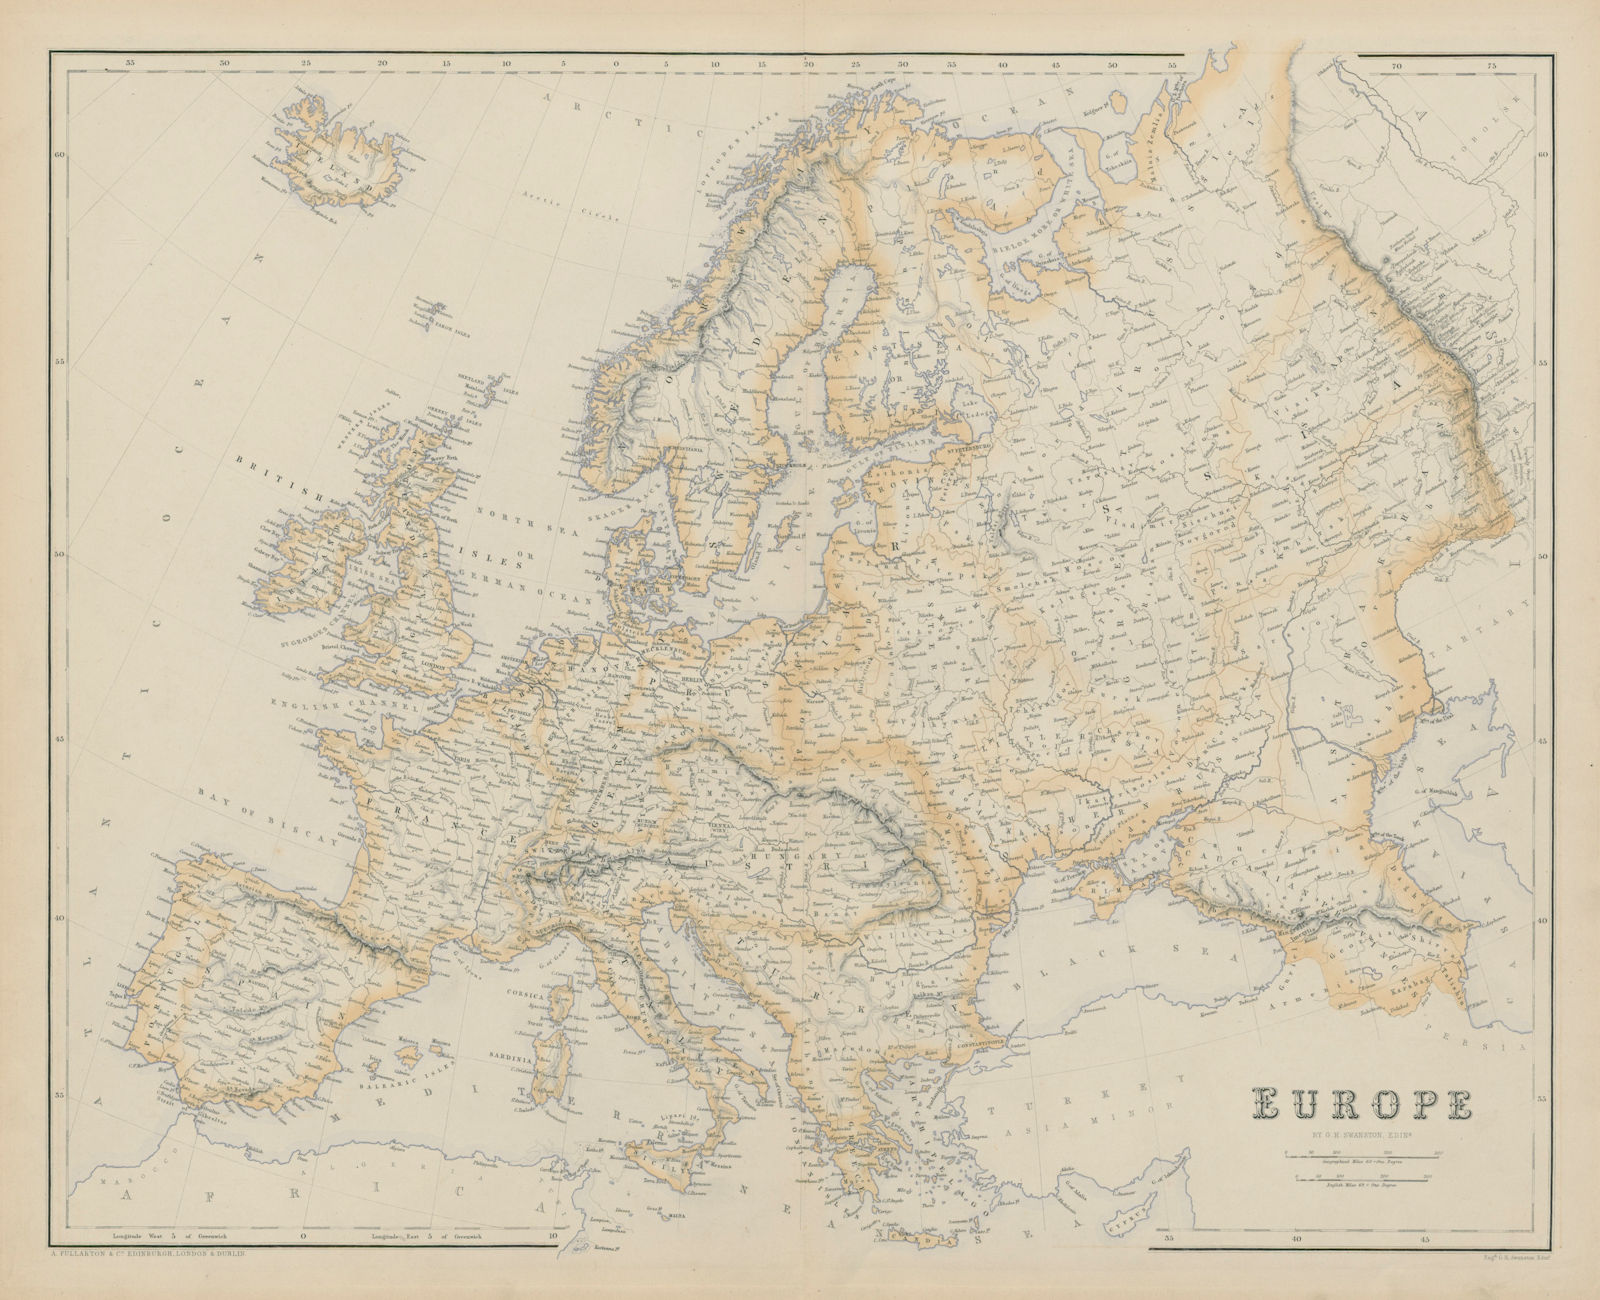 Europe by G.H. SWANSTON 1860 old antique vintage map plan chart